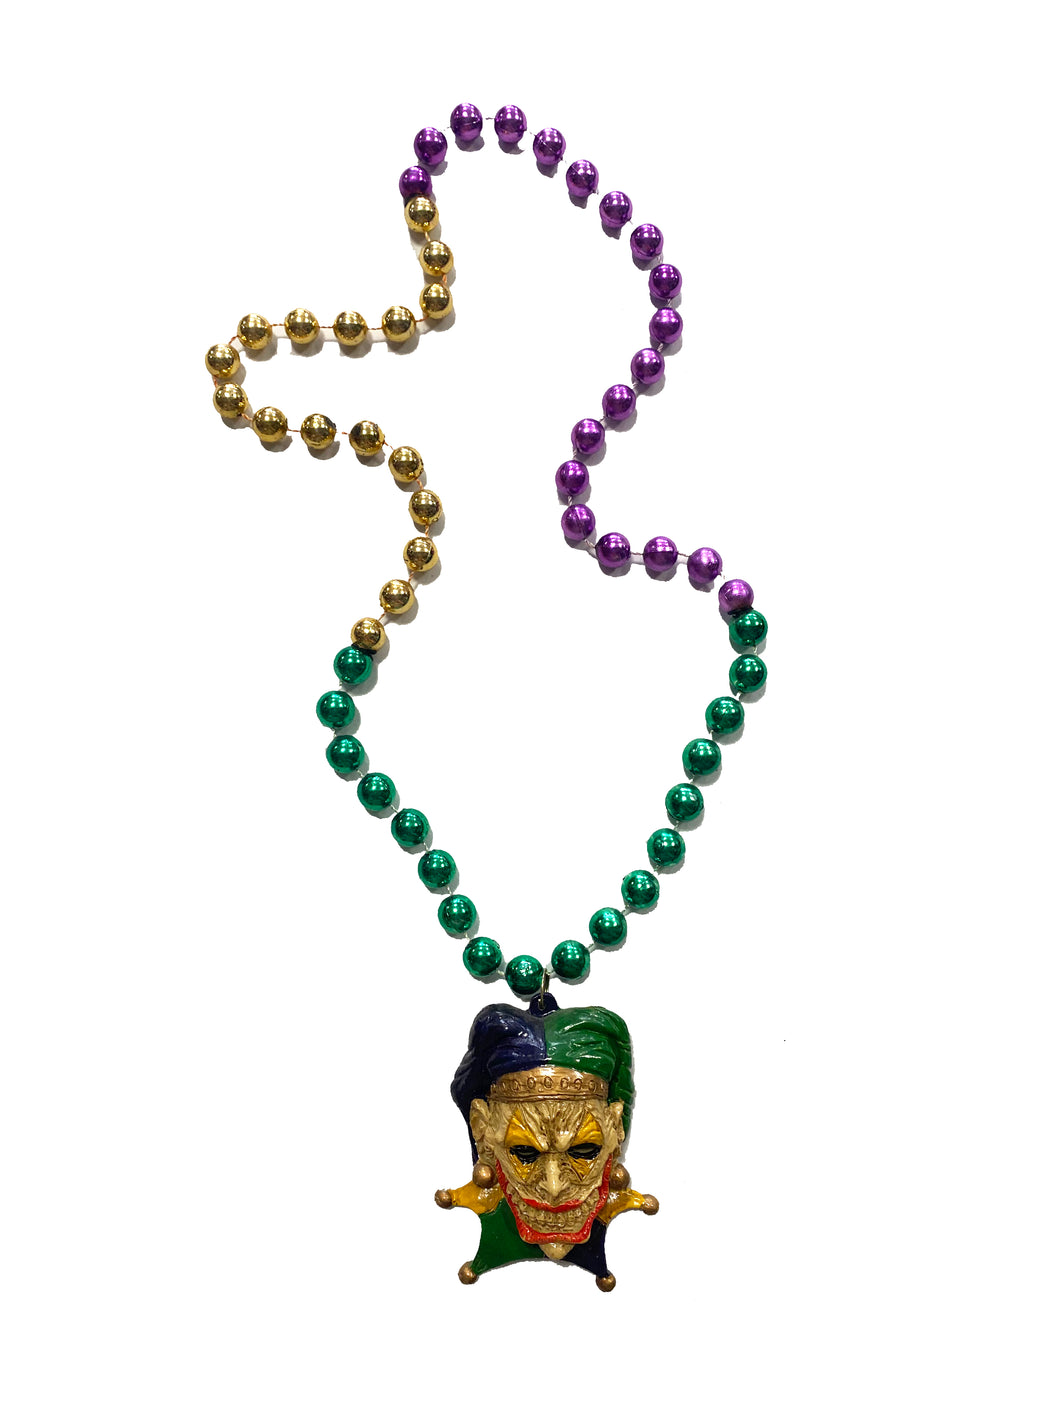 Jester Halloween Medallion on Purple, Green, and Gold Specialty Bead